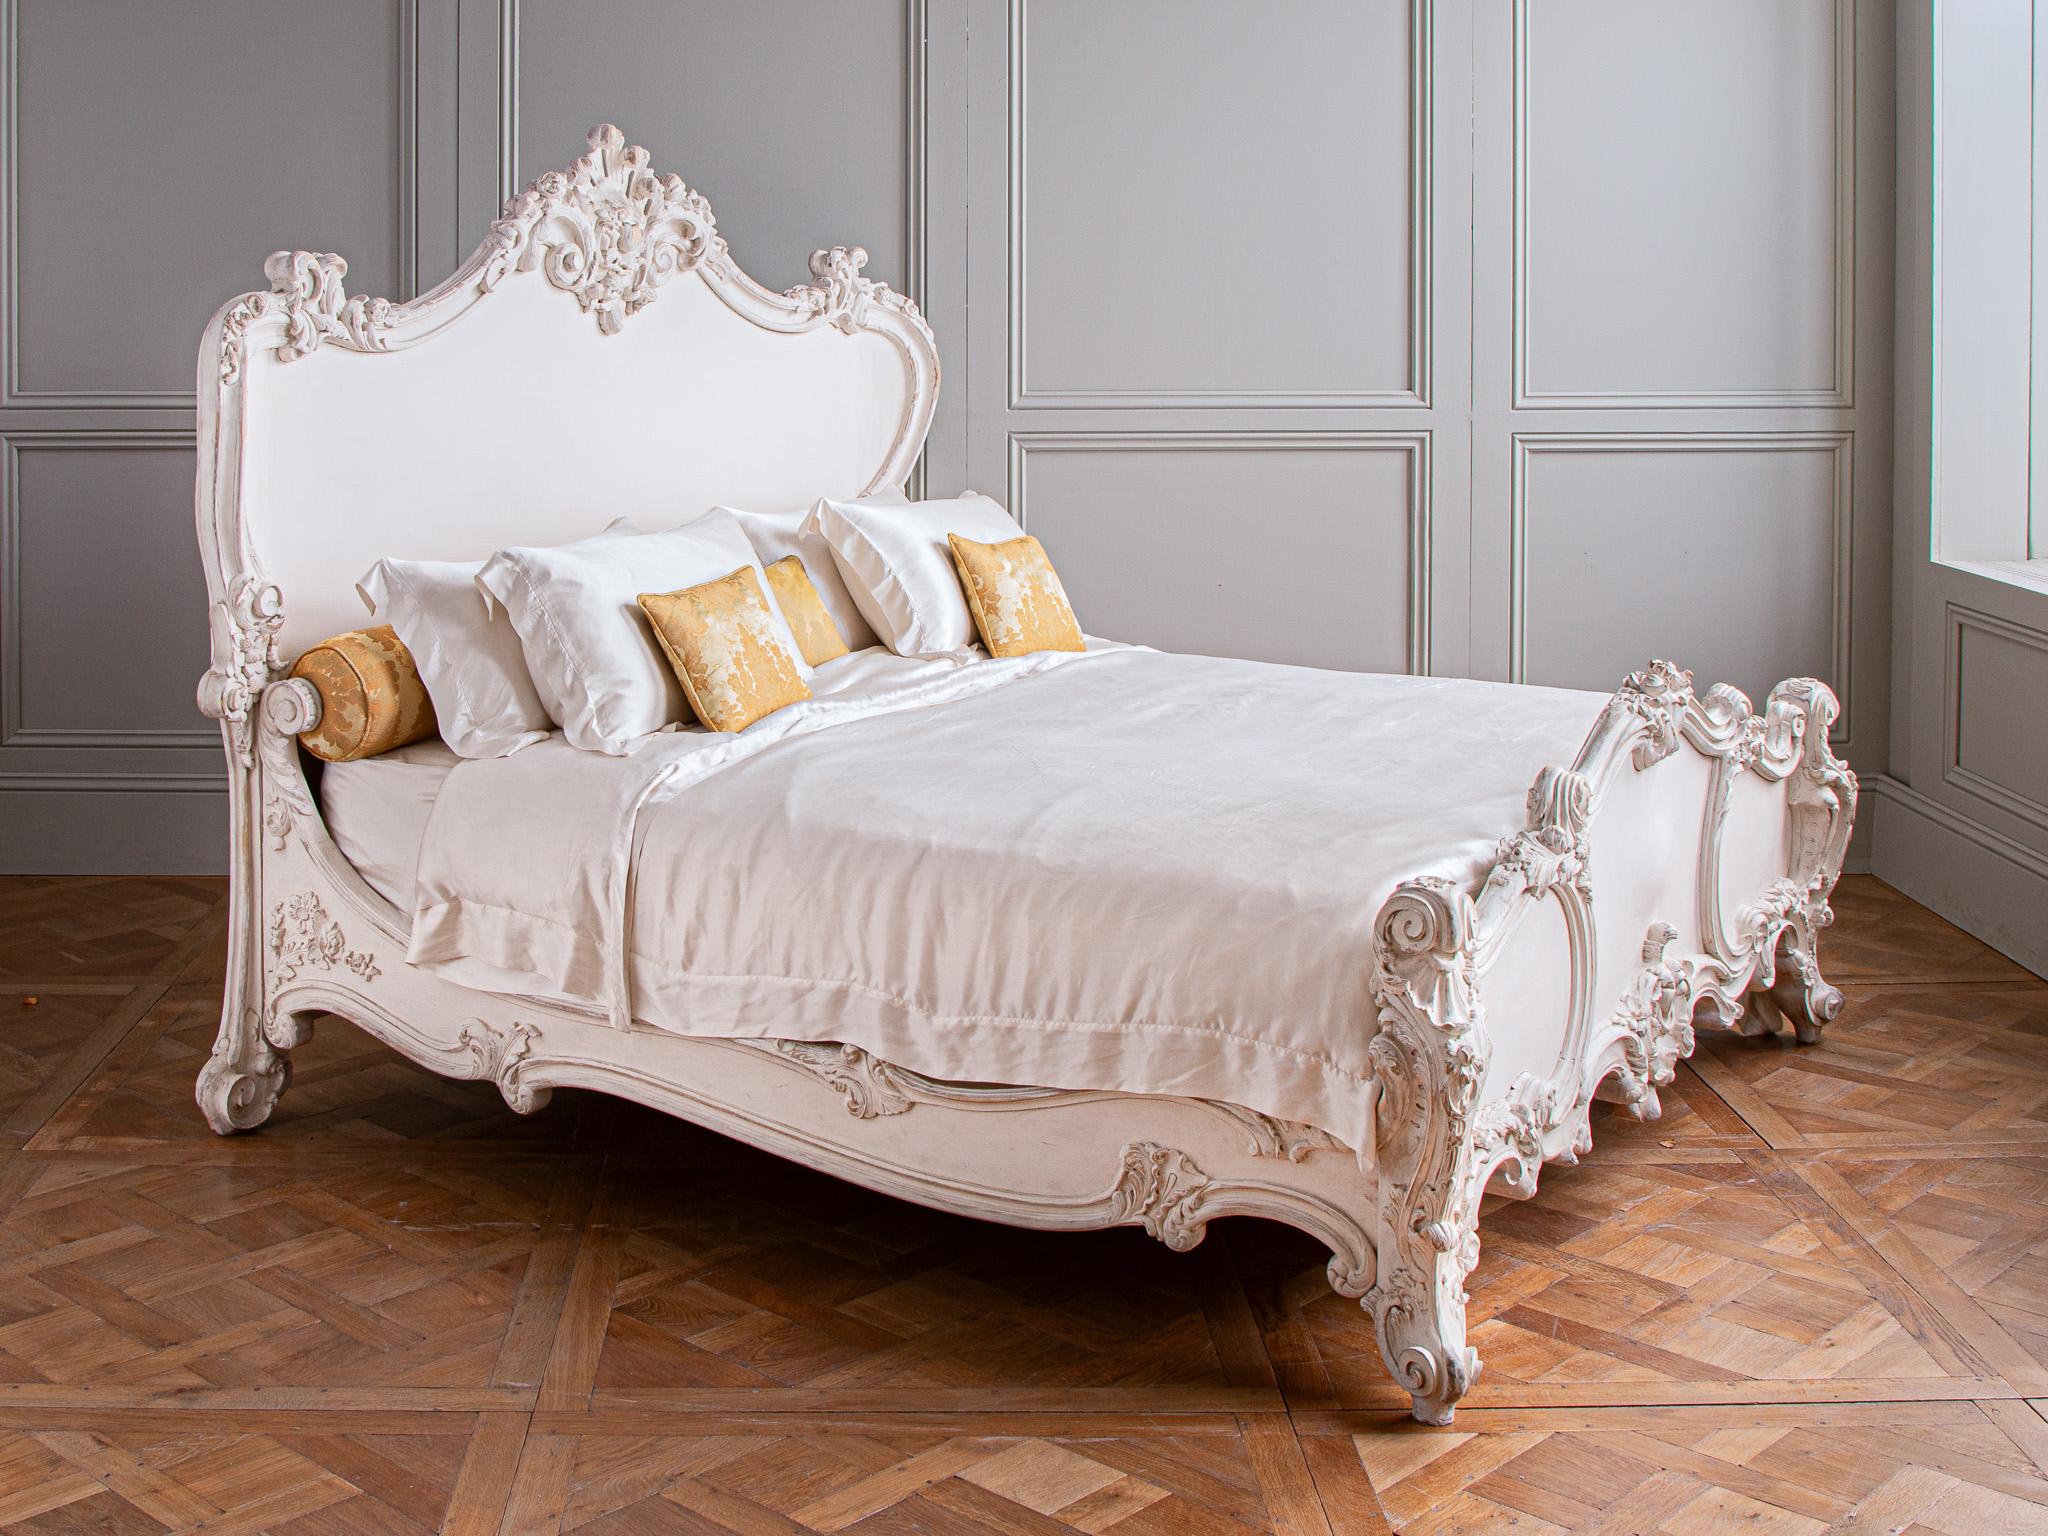 Hand-Carved The Cherub Bed Painted In White Gesso By La Maison London  US King For Sale